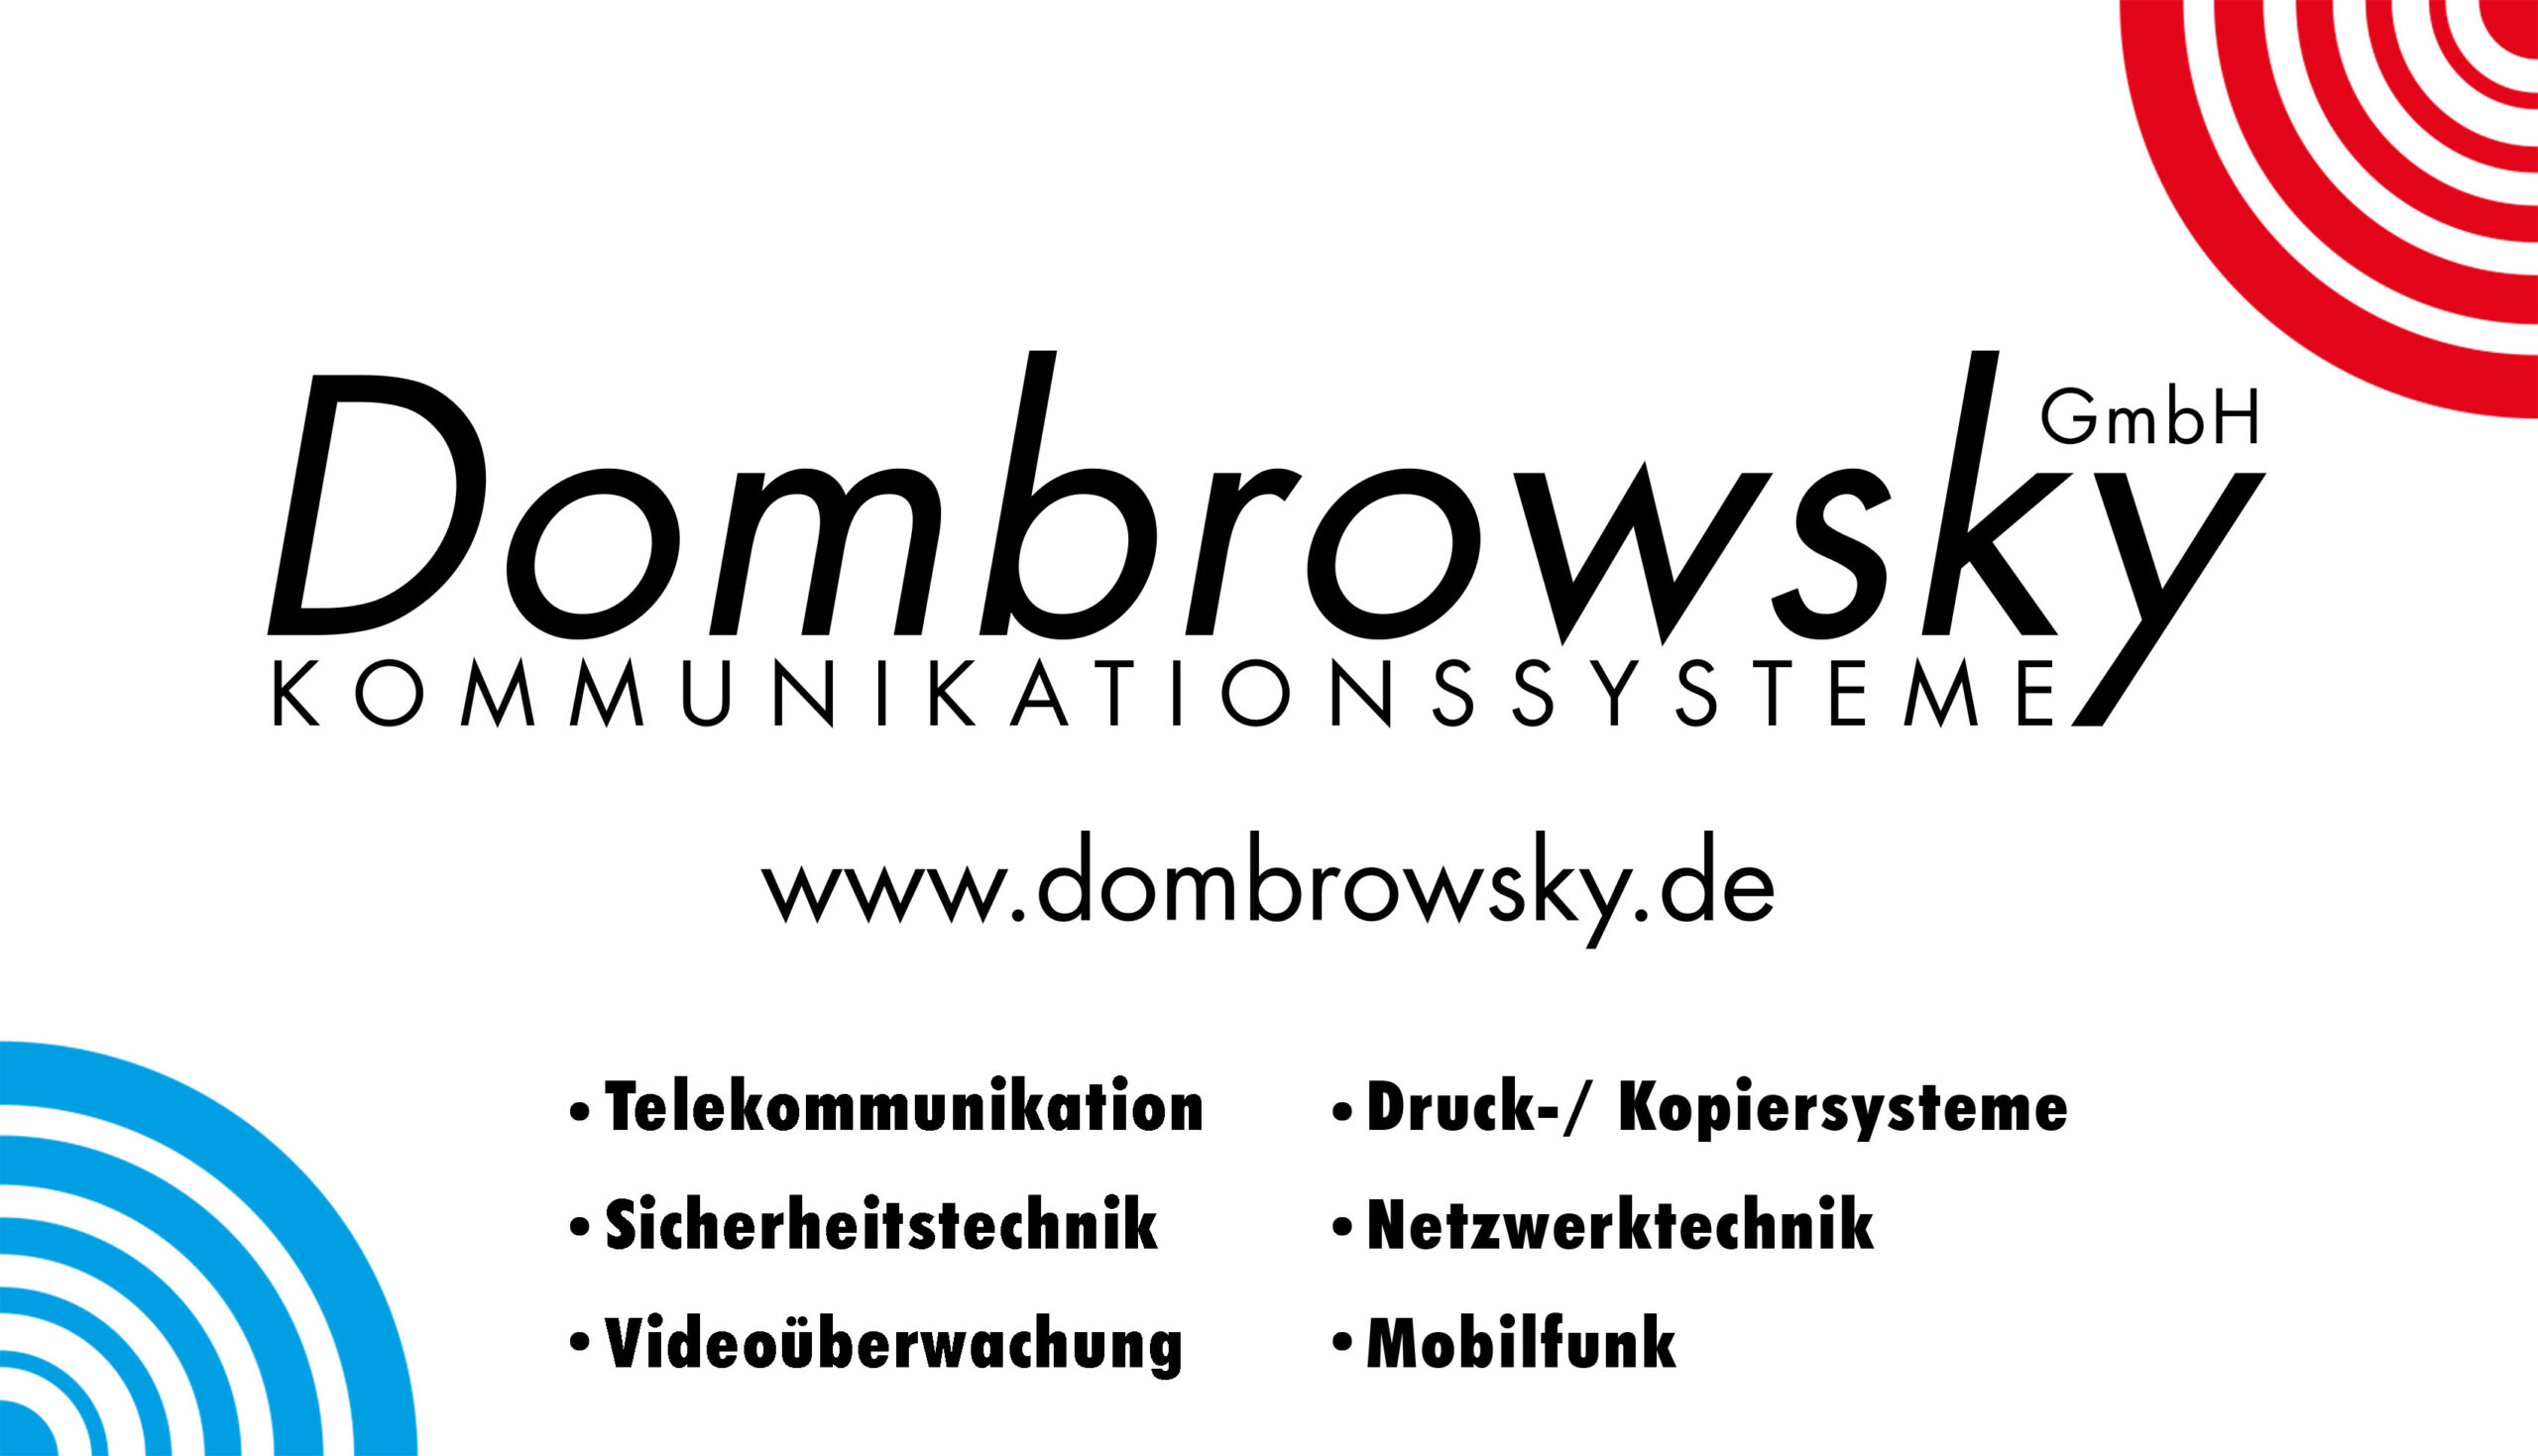 R. Dombrowsky GmbH